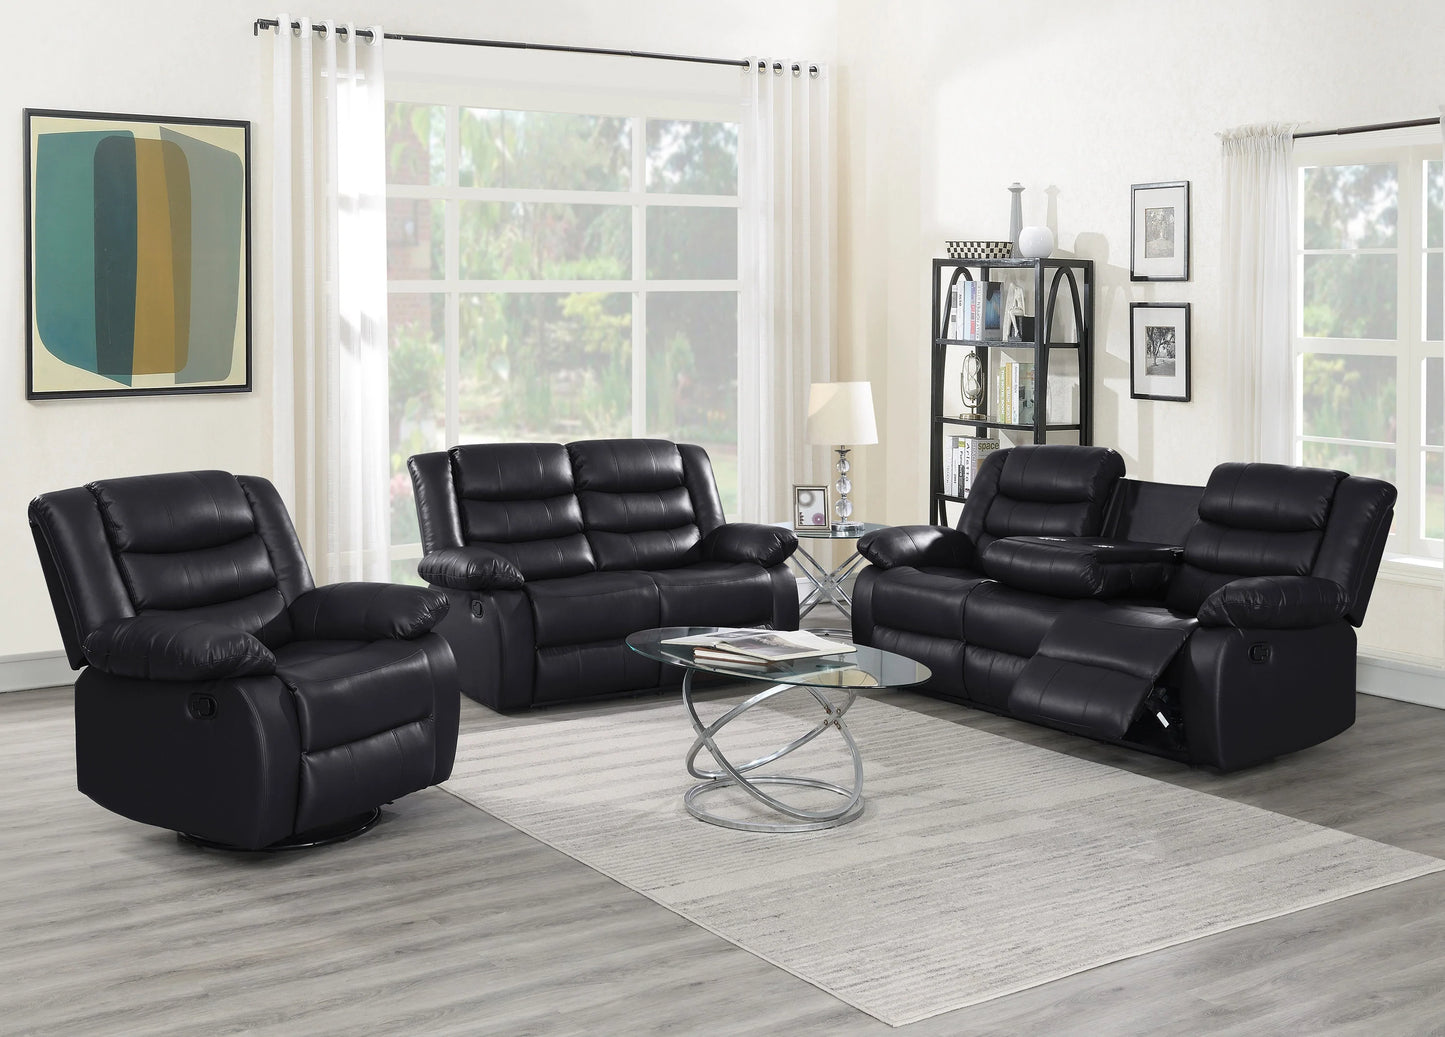 Sofa with Drop Down Table & 2 Cup Holders and Chair with Swivel Function